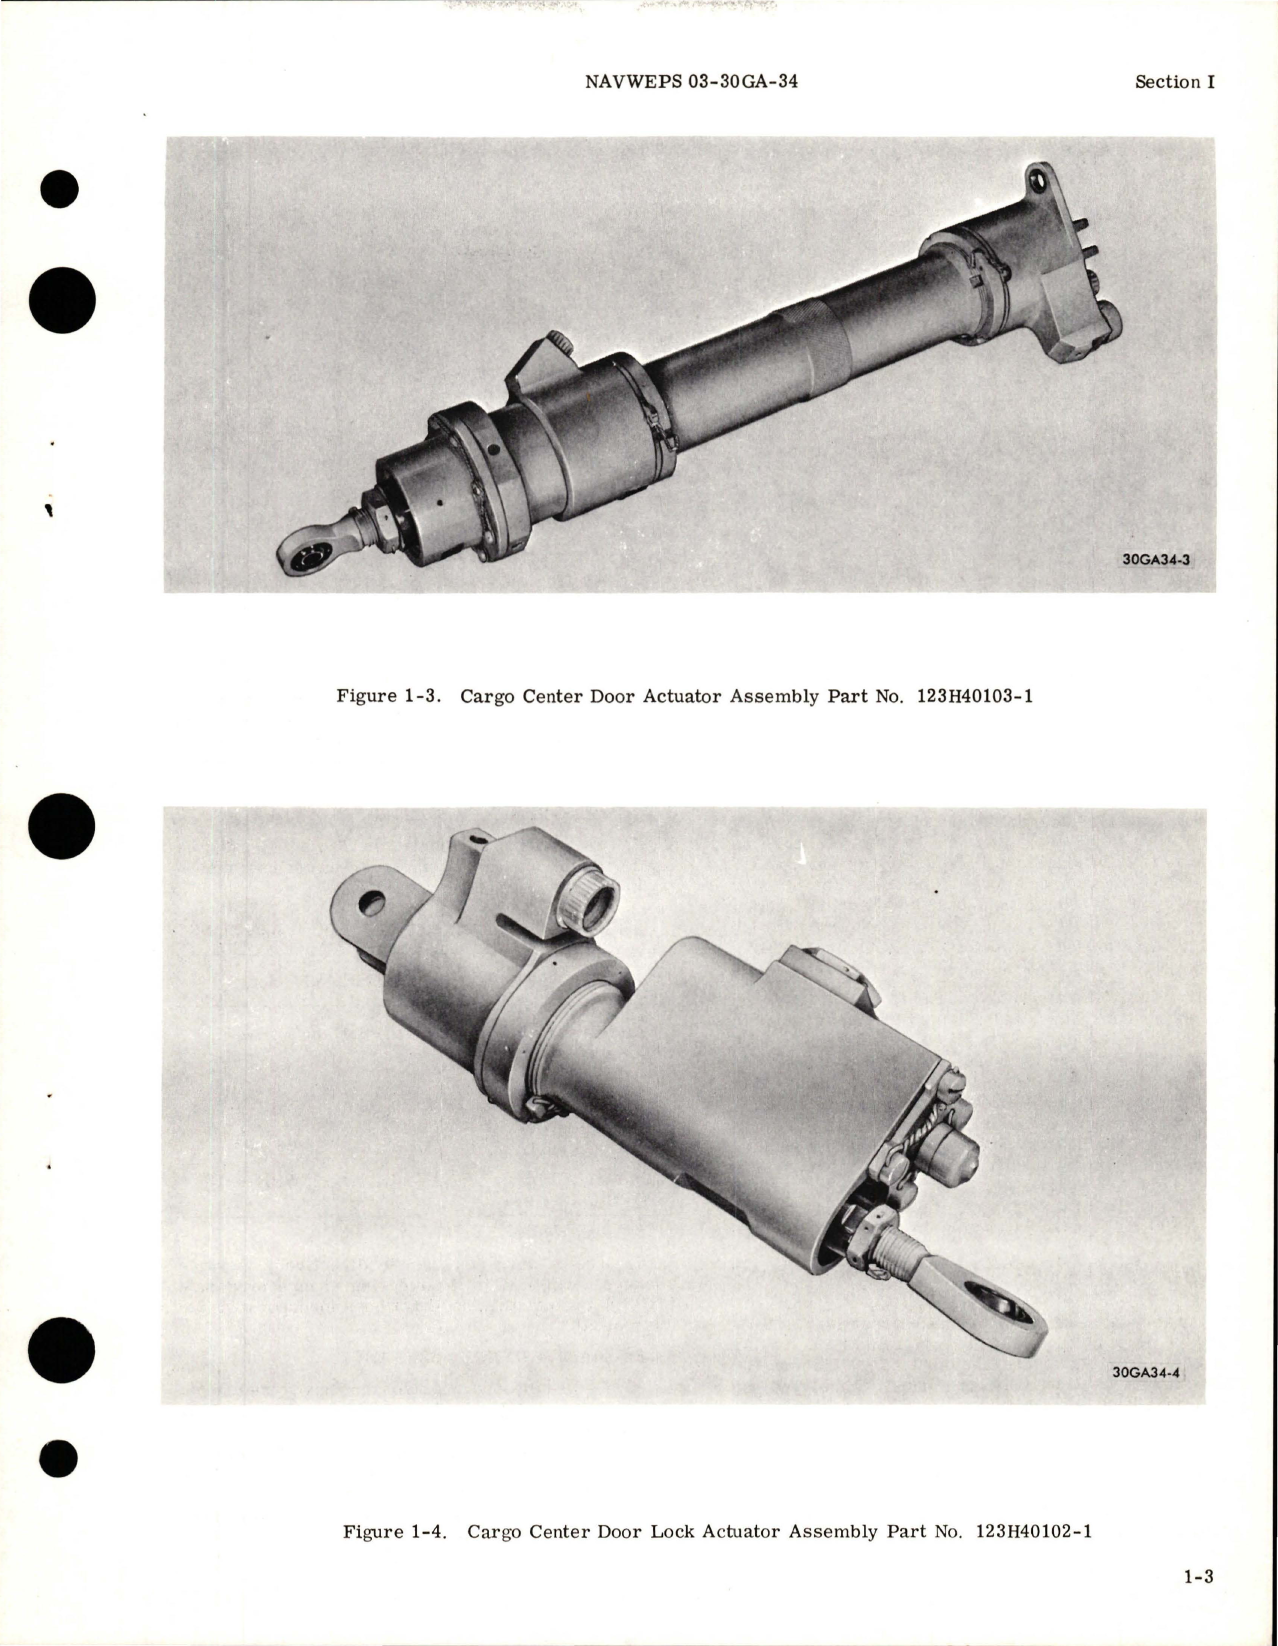 Sample page 9 from AirCorps Library document: Depot Maintenance Manual - Nose Gear Actuating and Down Lock Cylinder - Cargo Center Door and Center Door Lock Actuators -  Arresting Hook, Accumulator Lift, Actuator, Dashpot and Truss - Tail Skid Lift Actuator 